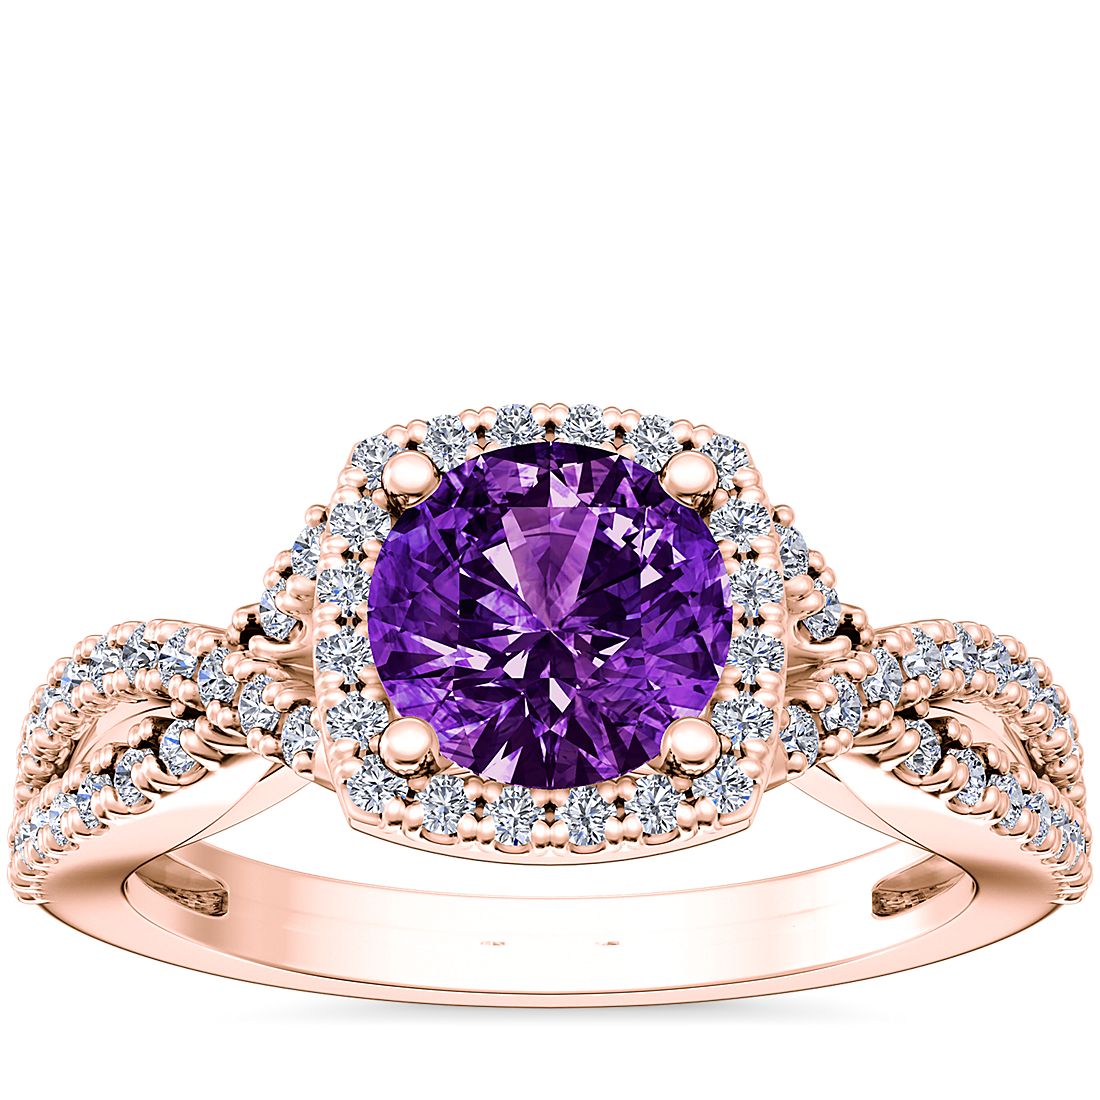 Twist Halo Diamond Engagement Ring with Round Amethyst in 14k Rose Gold (8mm)